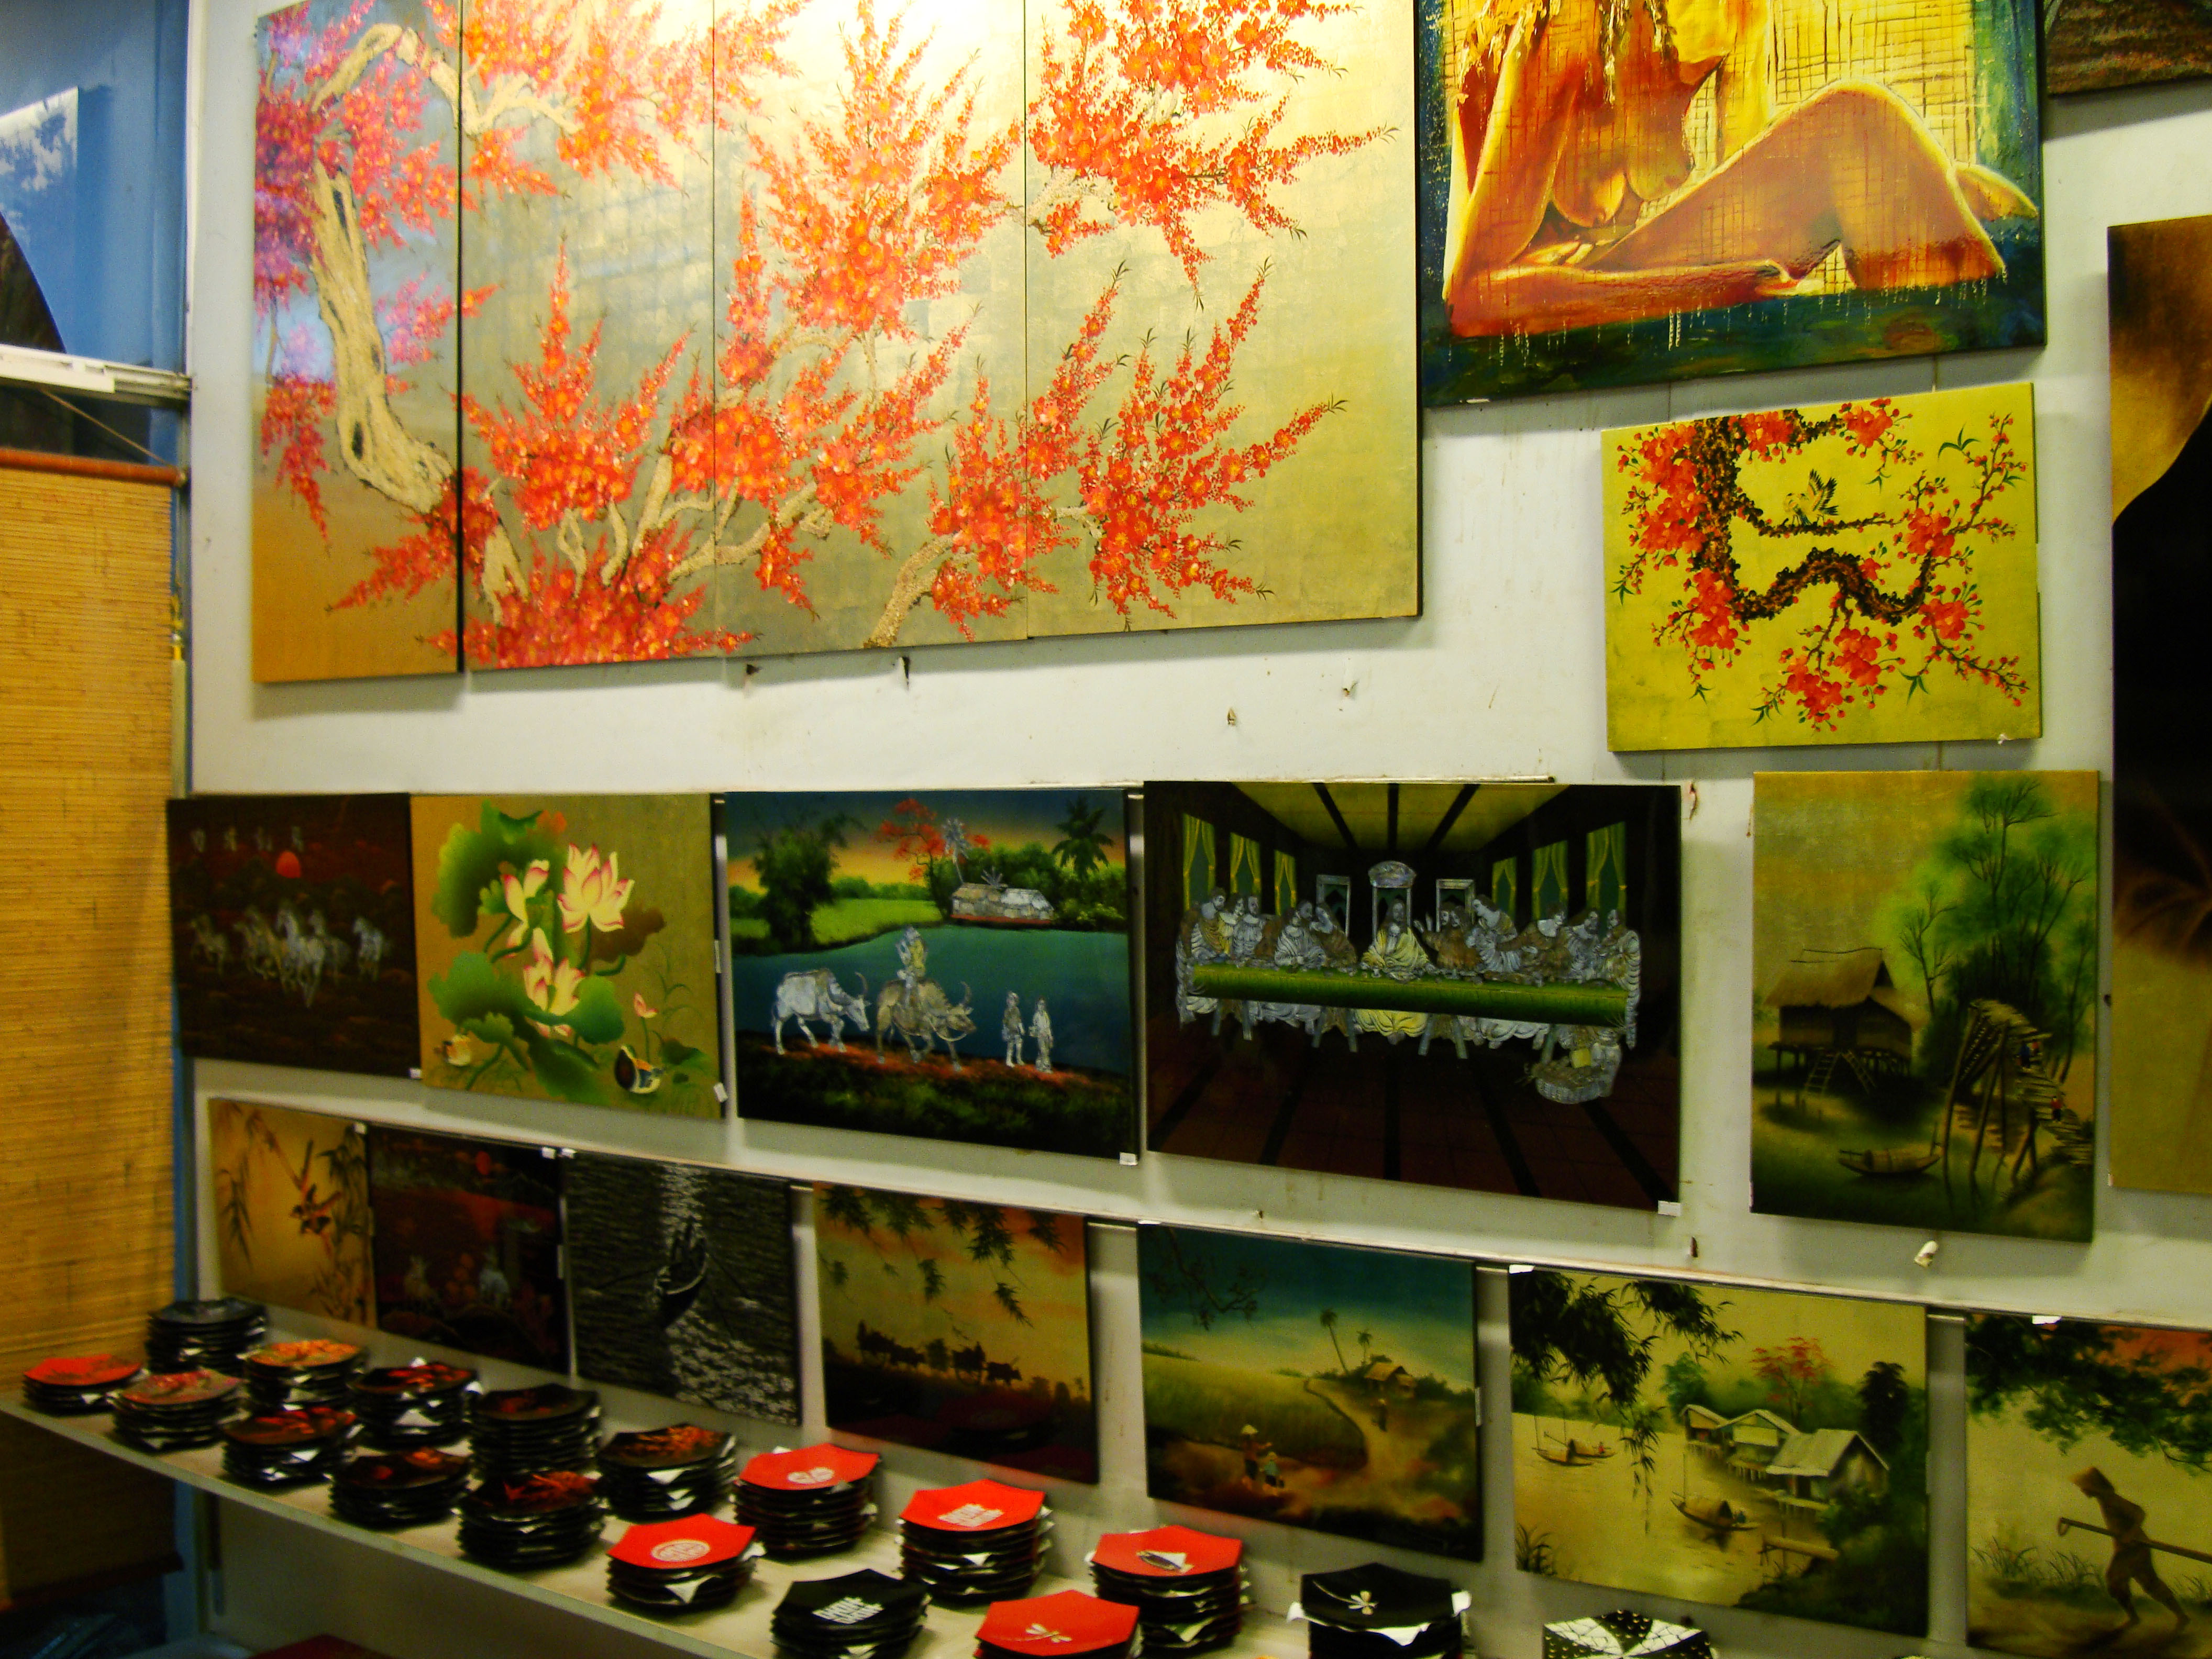 Vietnamese Lacquerware paintings Tay Son District 3 HCMC 2009 01